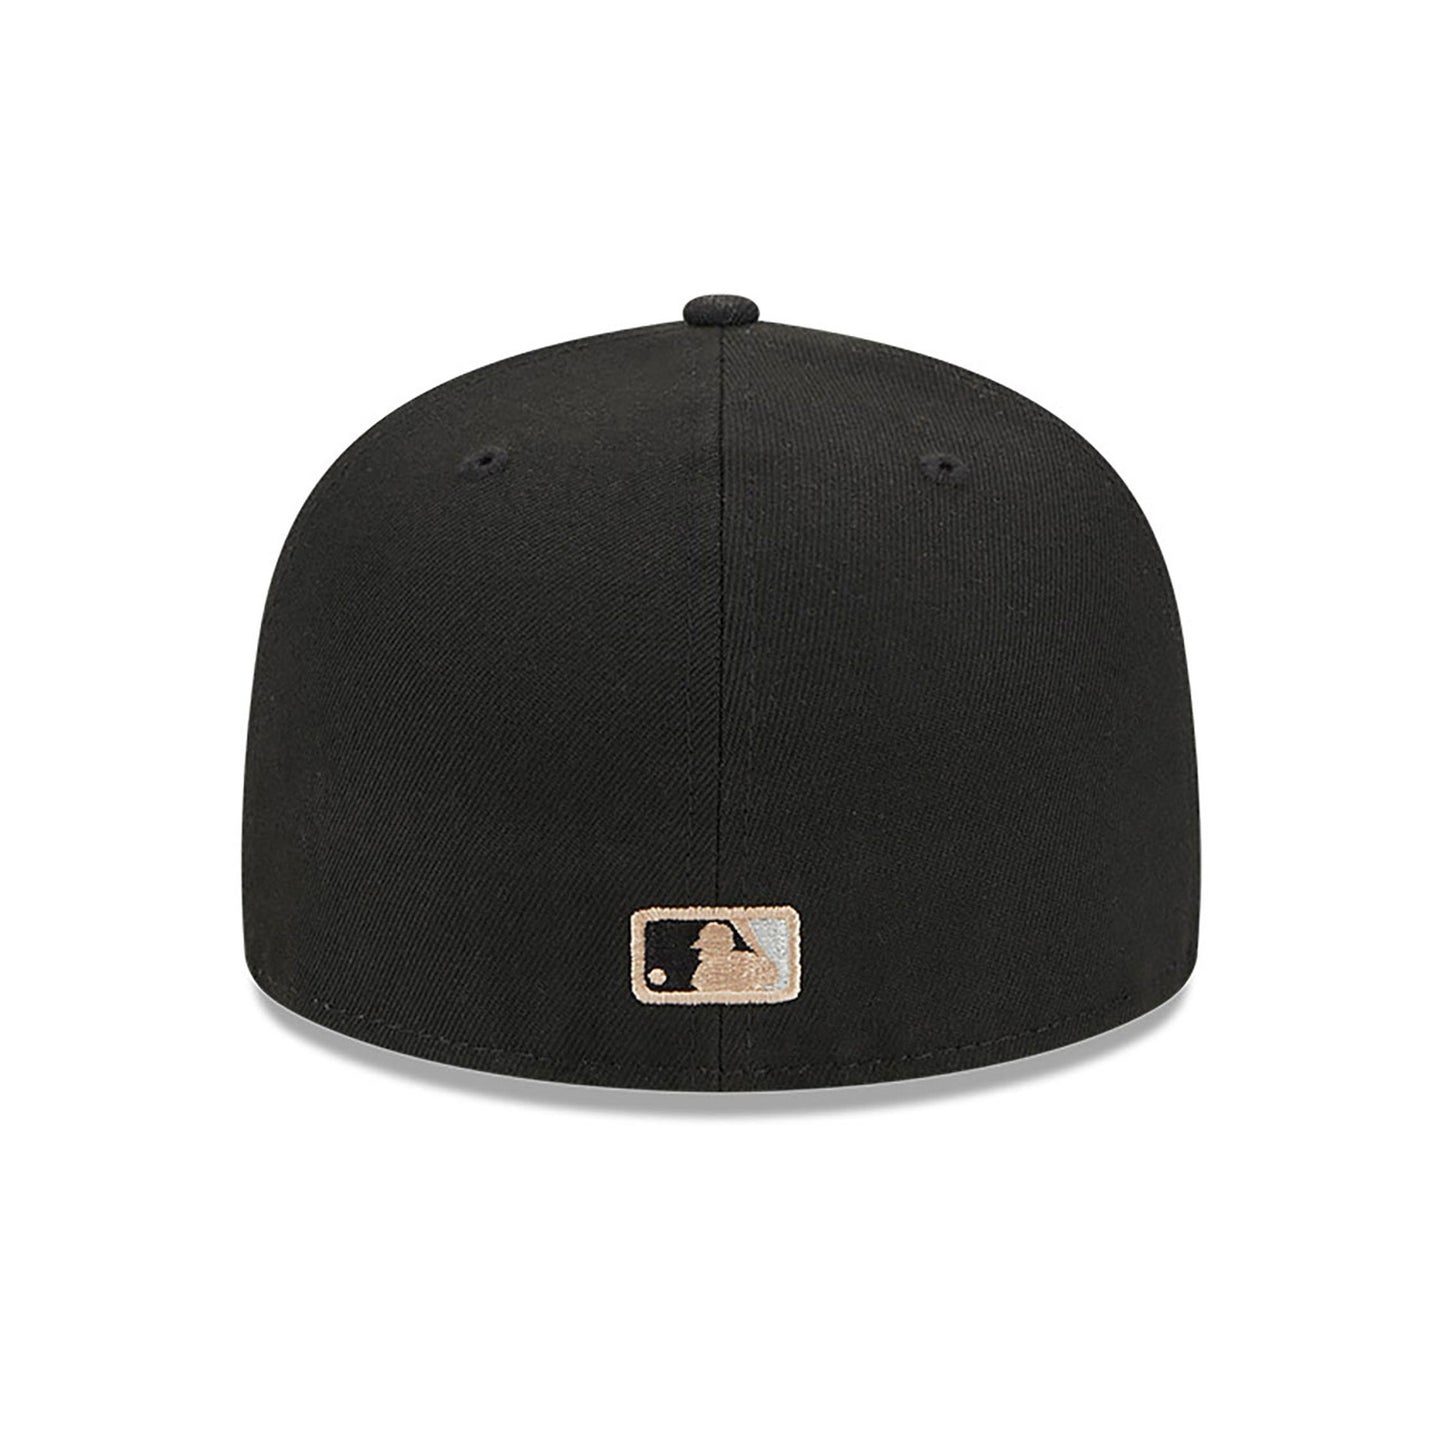 Chicago White Sox Gold Leaf Black 59FIFTY Fitted Cap